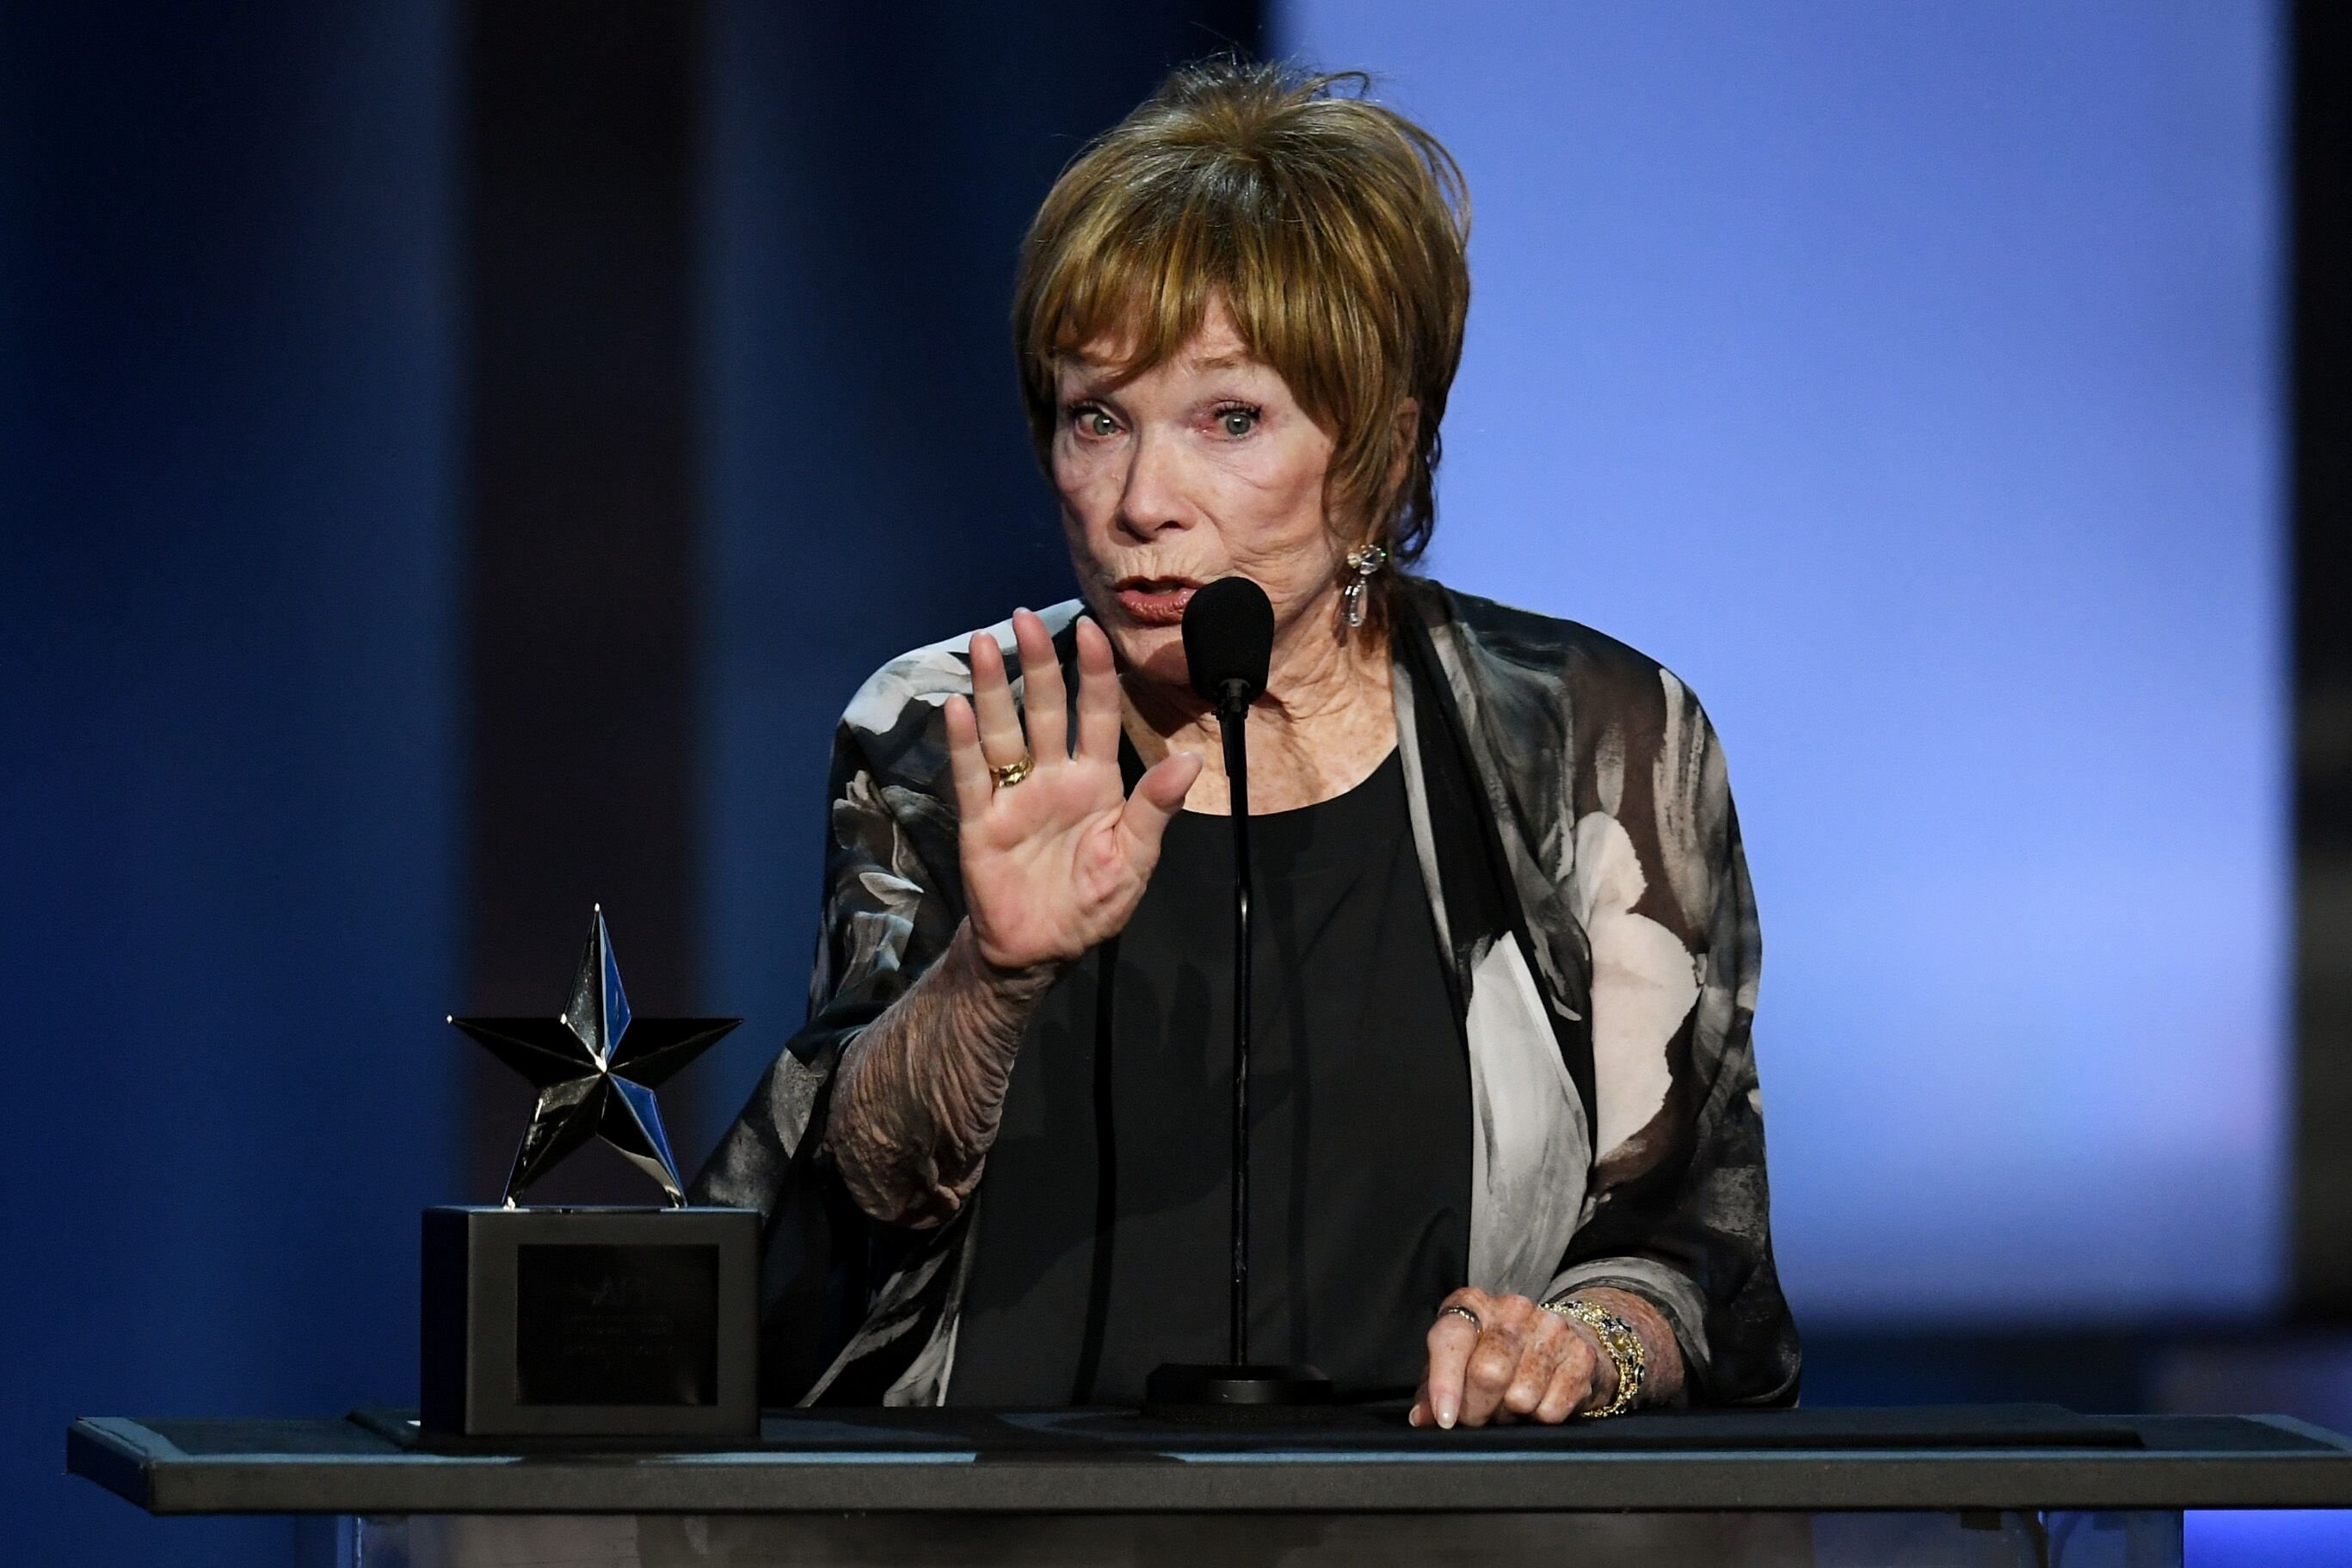 Shirley MacLaine at the American Film Institute's 46th Life Achievement Award Gala on June 7, 2018 in Hollywood, California | Photo: Getty Images